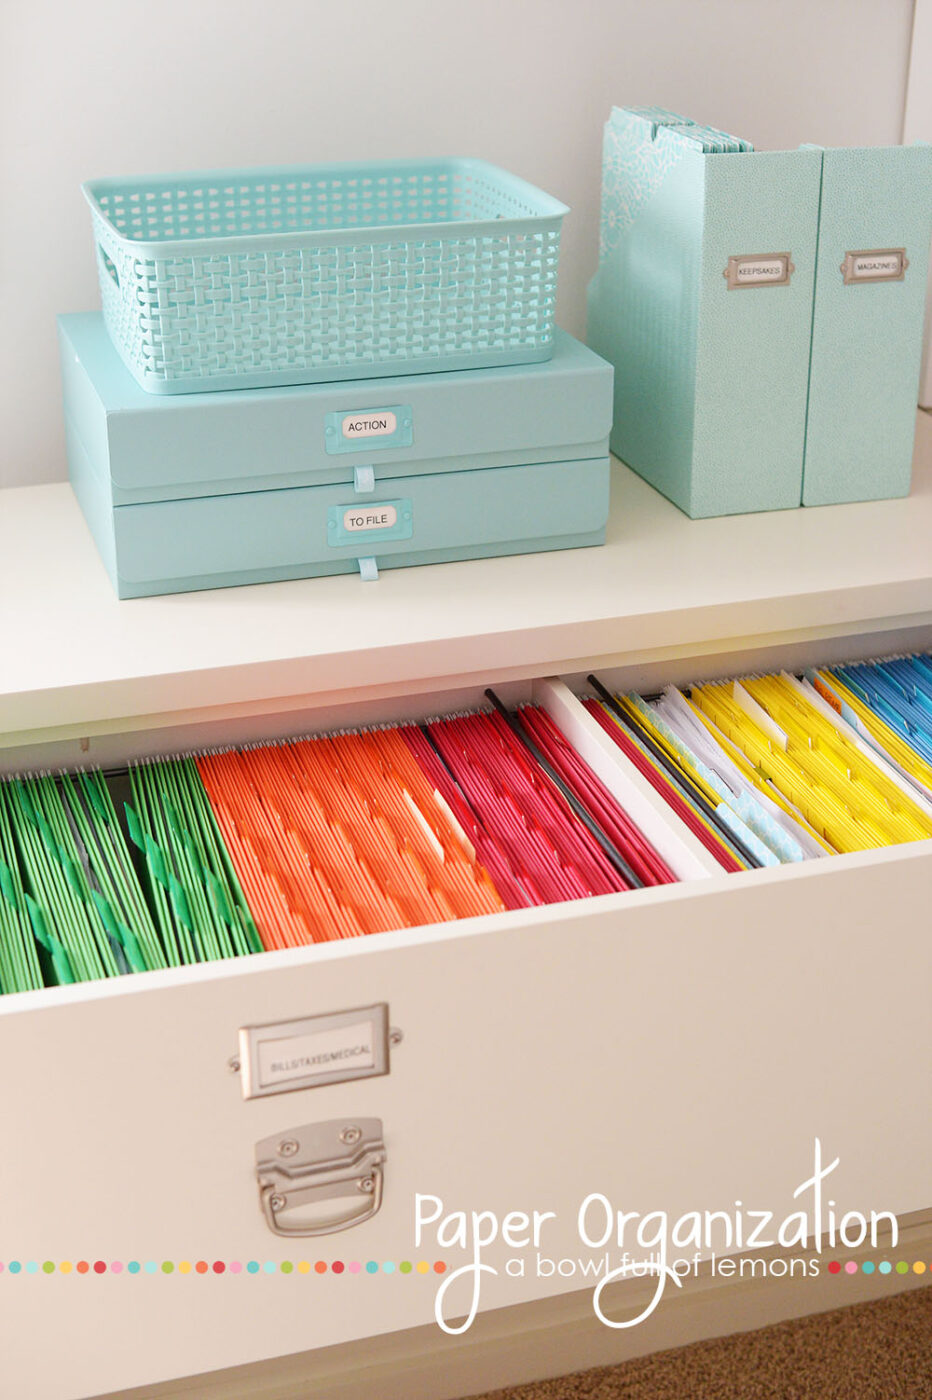 Easy DIY Hacks to Organize Your Paper Clutter - Paper Clutter, diy organization projects, DIY Organization Ideas, diy organization hacks, DIY Hacks to Organize Your Paper Clutter